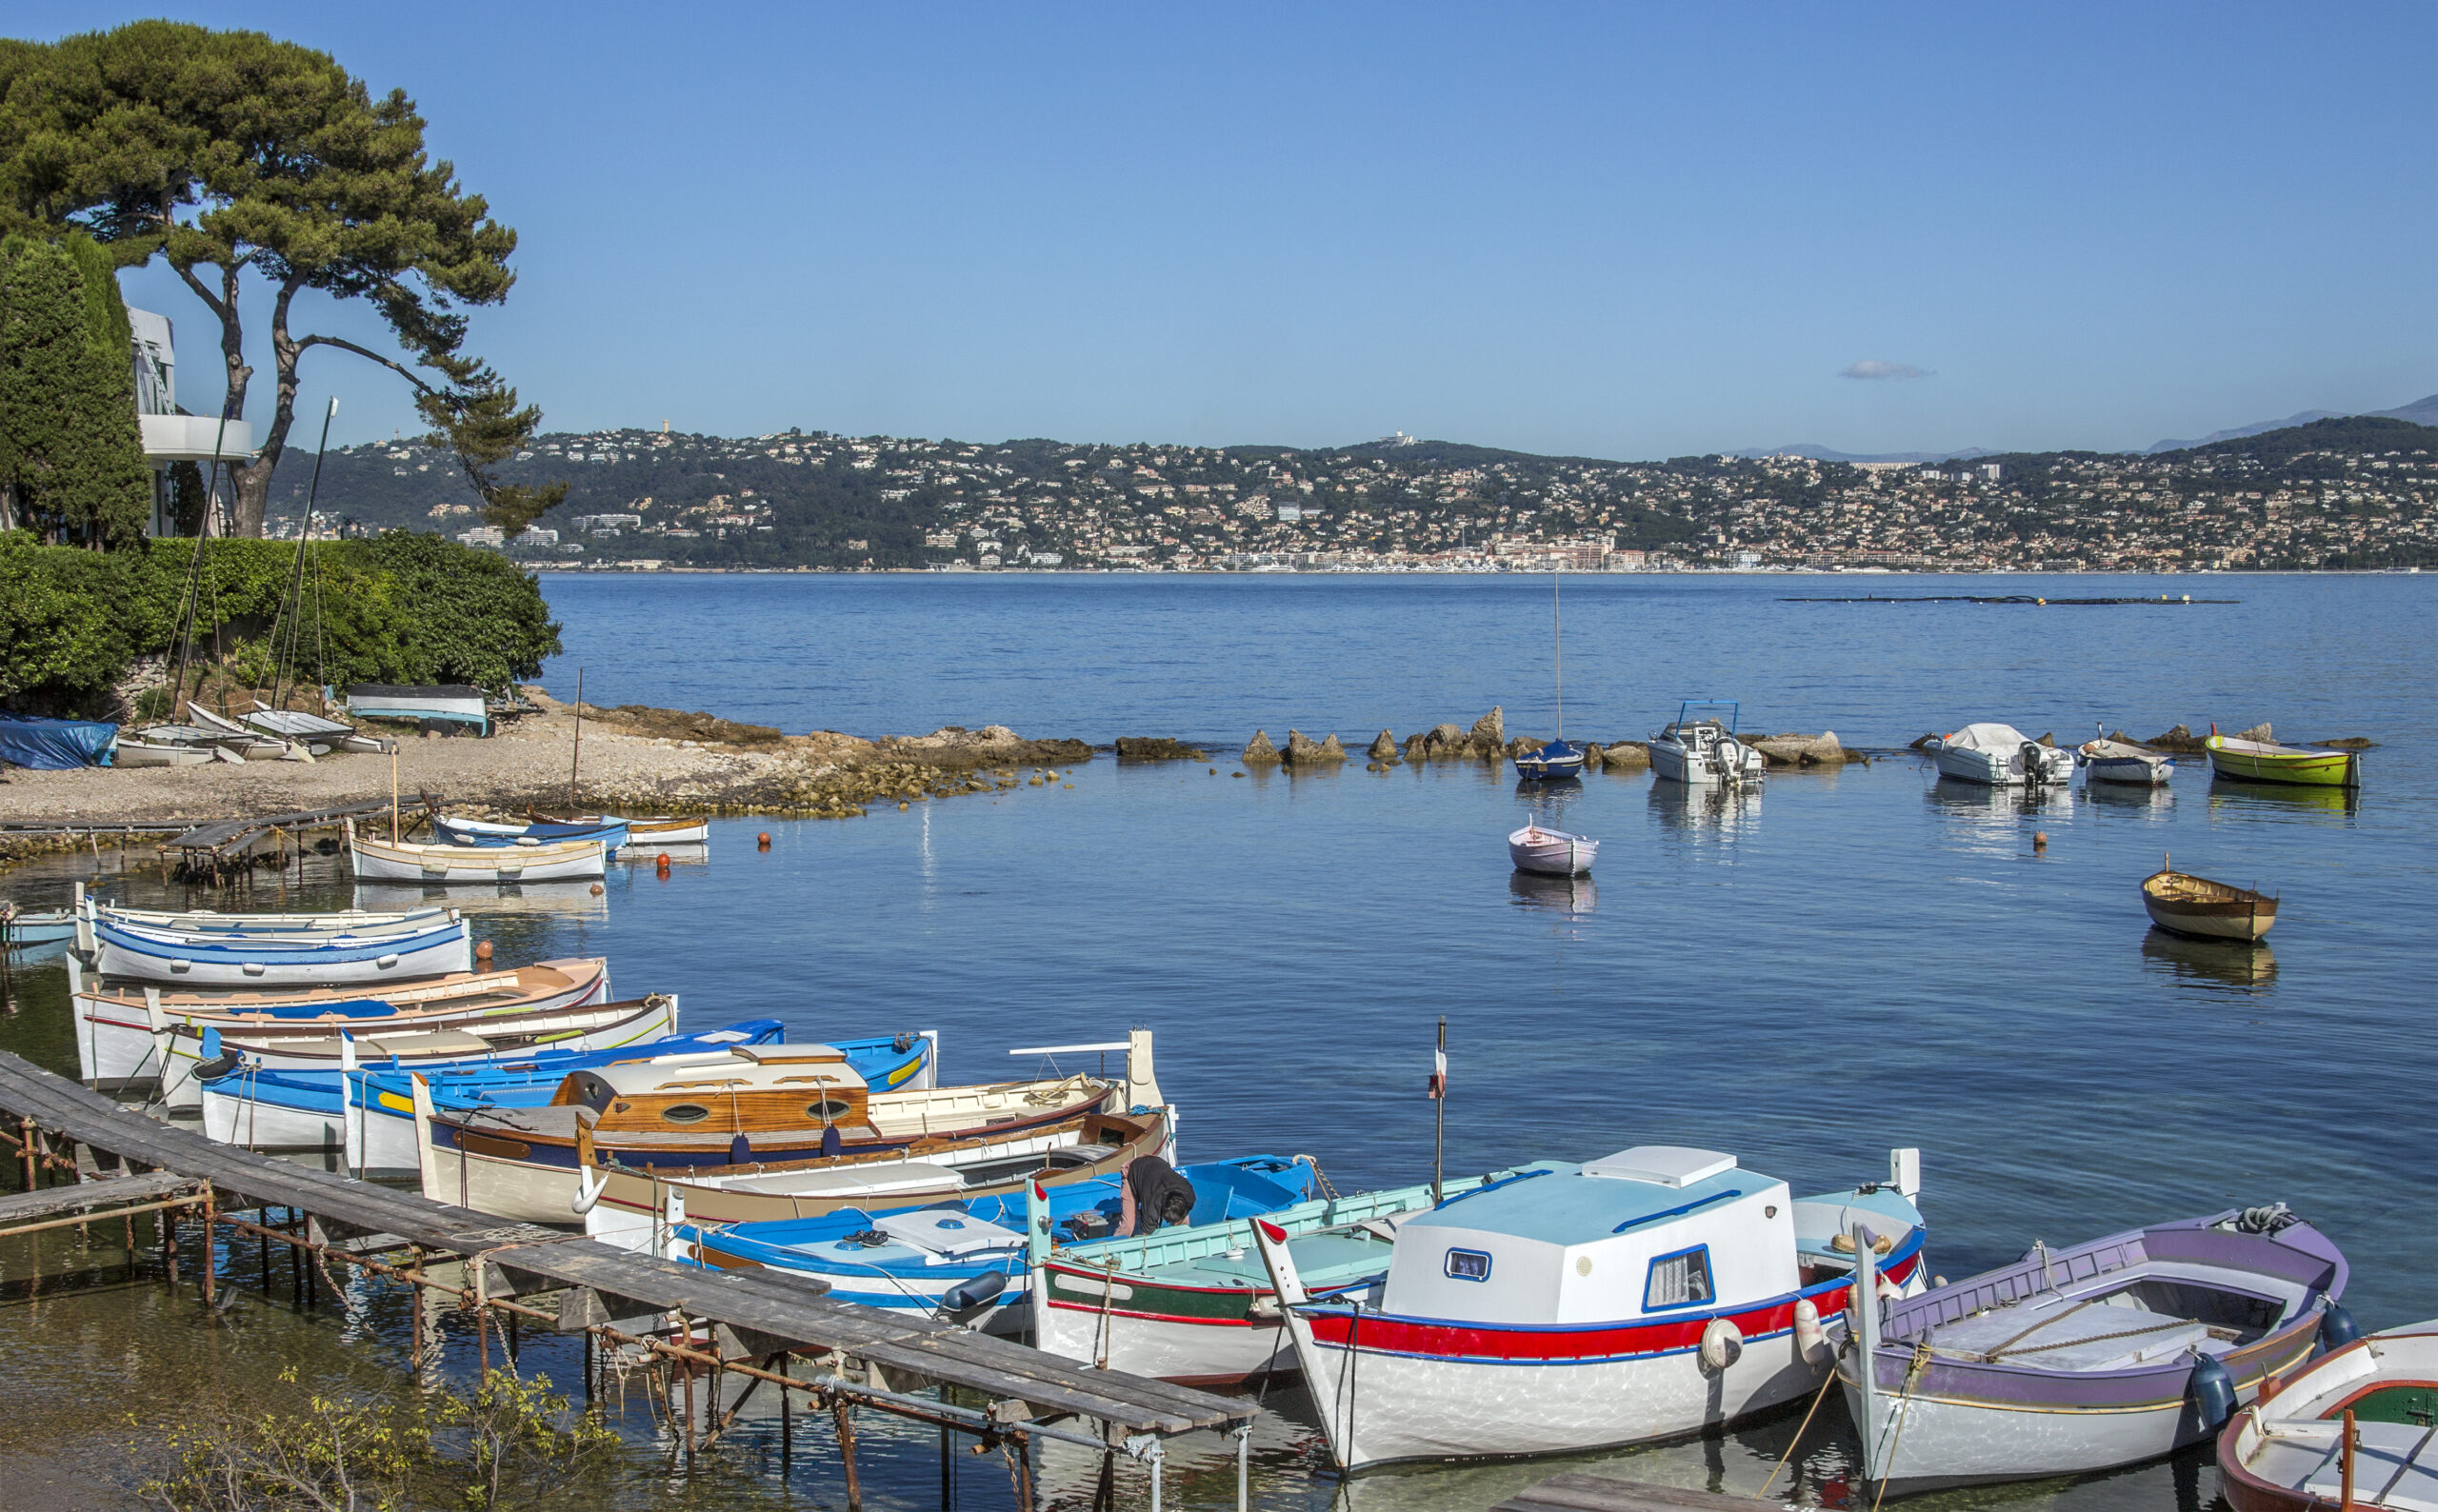 The small harbor of Cap de Antibes on the French Riviera in the South of France.